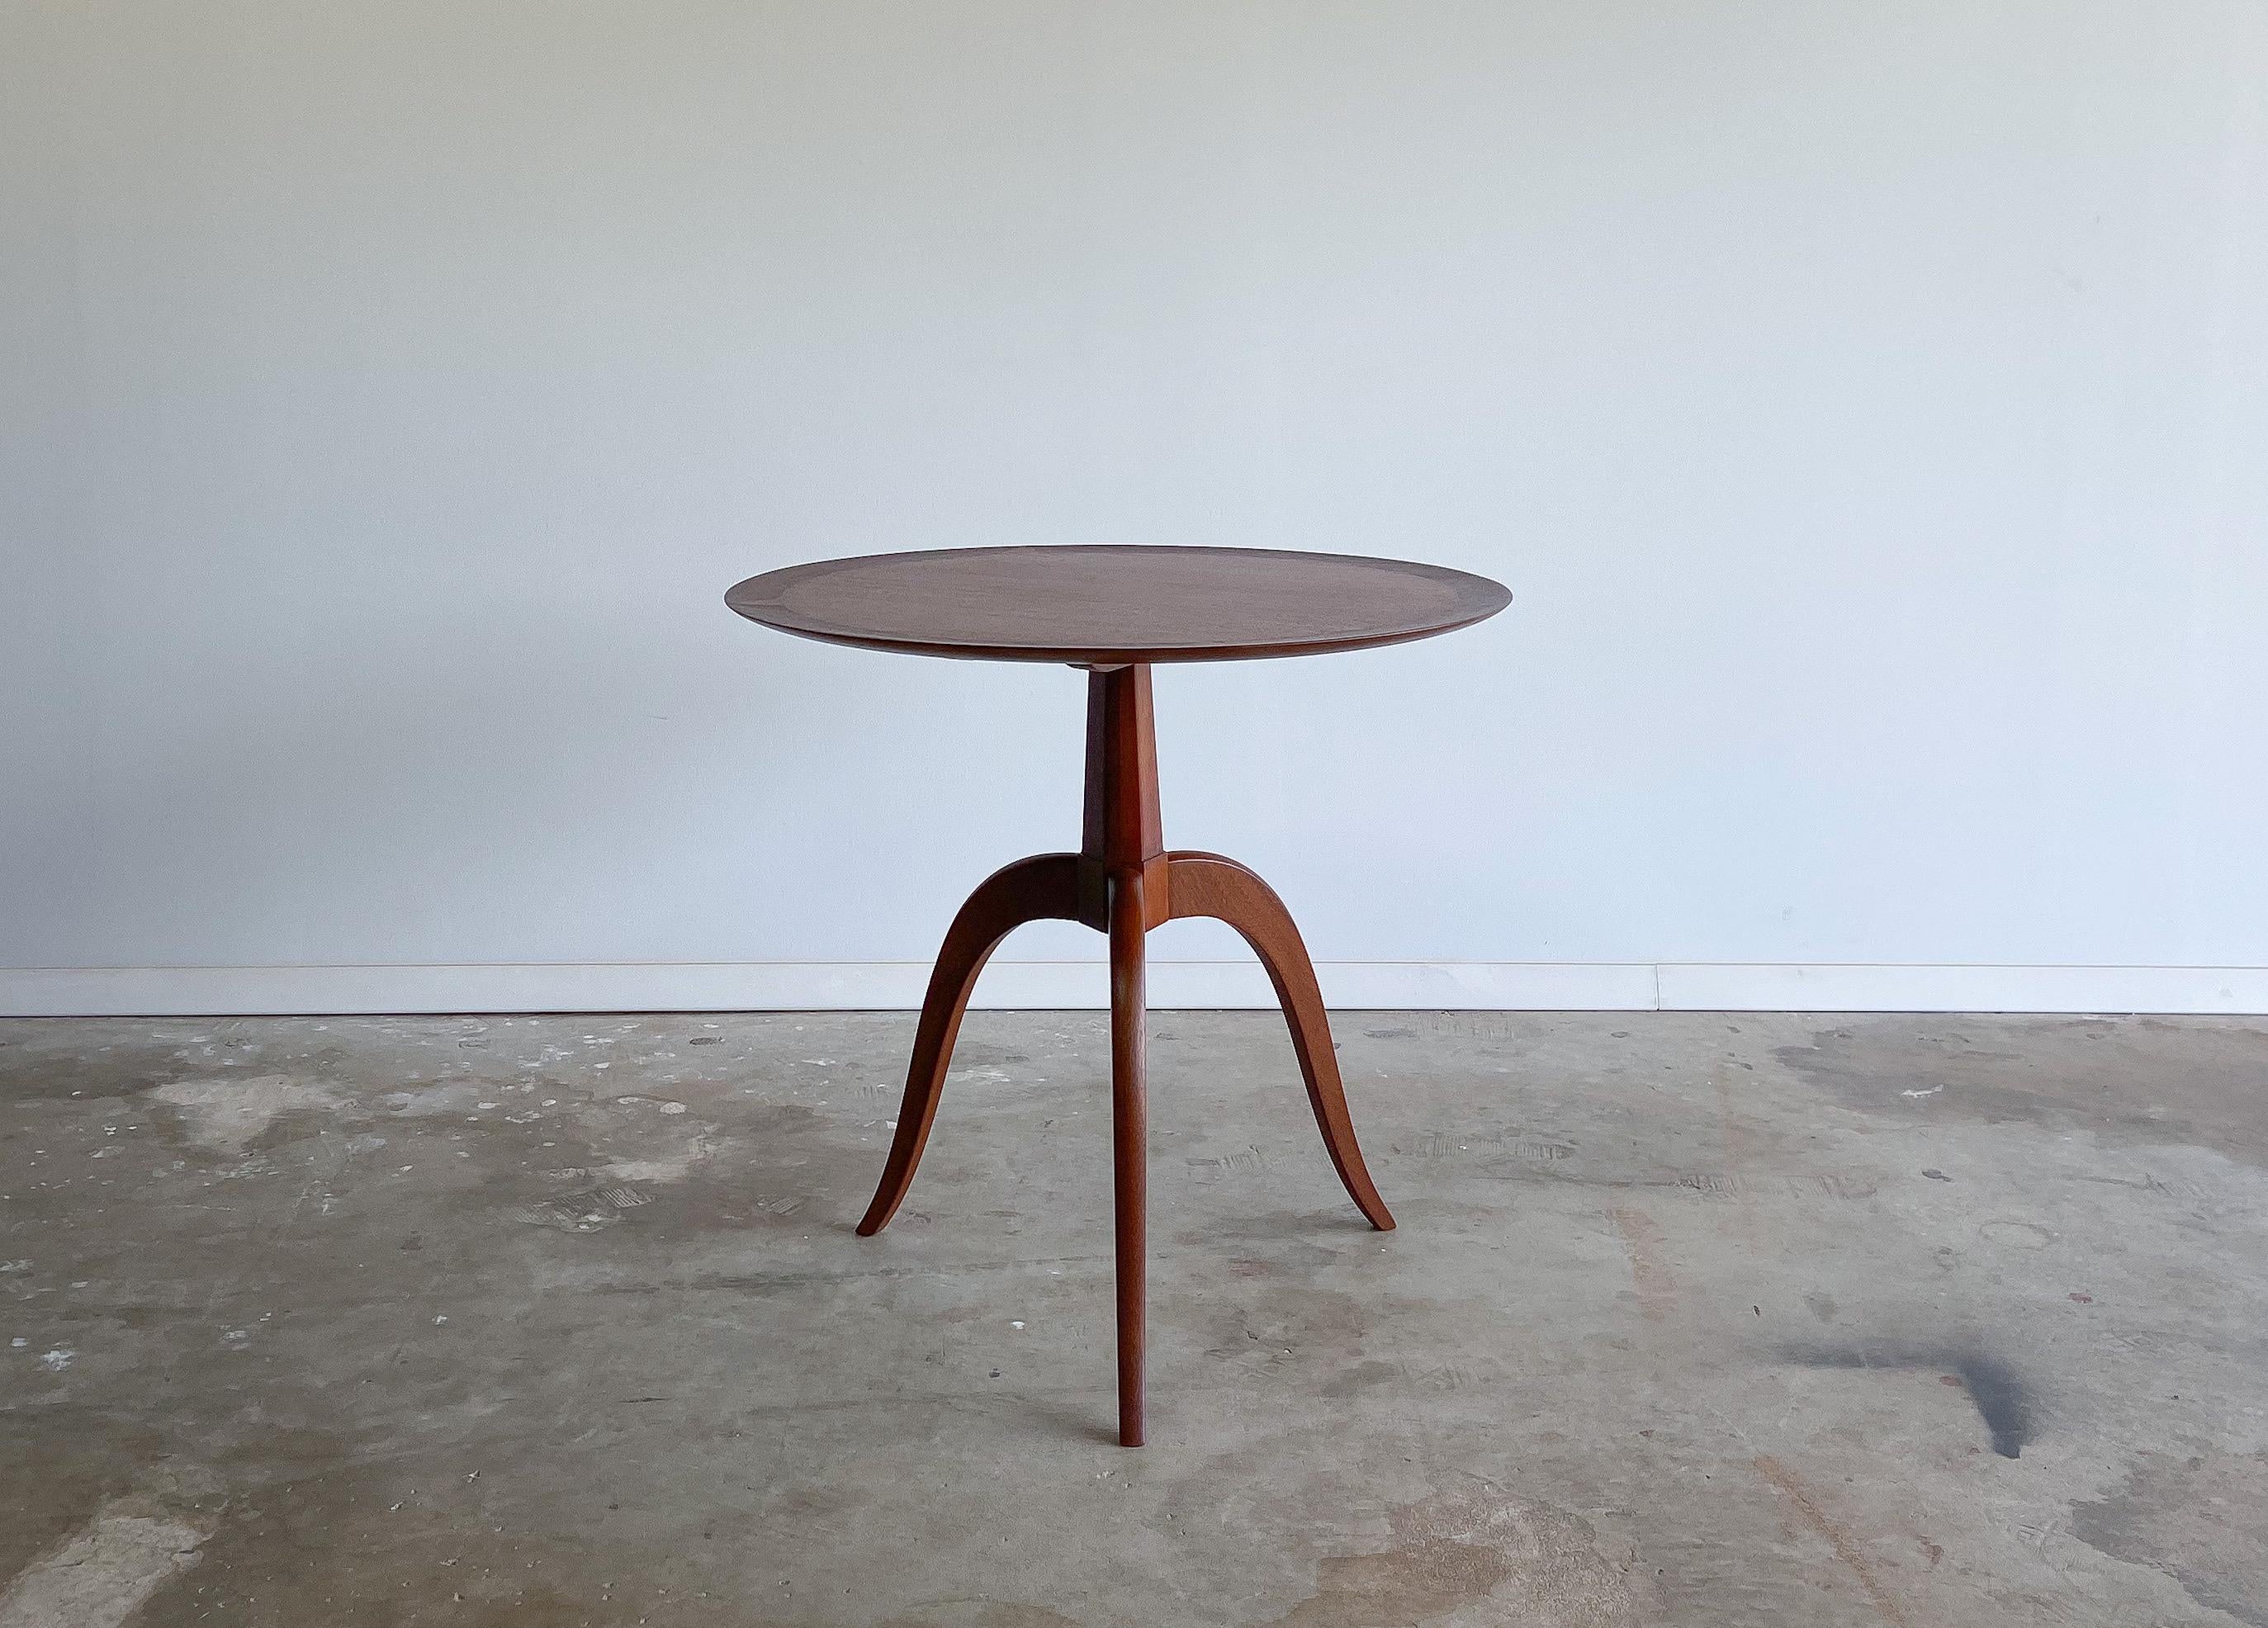 An elegant side or end table designed by Edward Wormley for Dunbar, circa 1950s.

Featuring Dunbar's unmatched quality; this table has a beautiful surface made from ribbon mahogany with a contrasting solid walnut outer ring.

The base/legs are